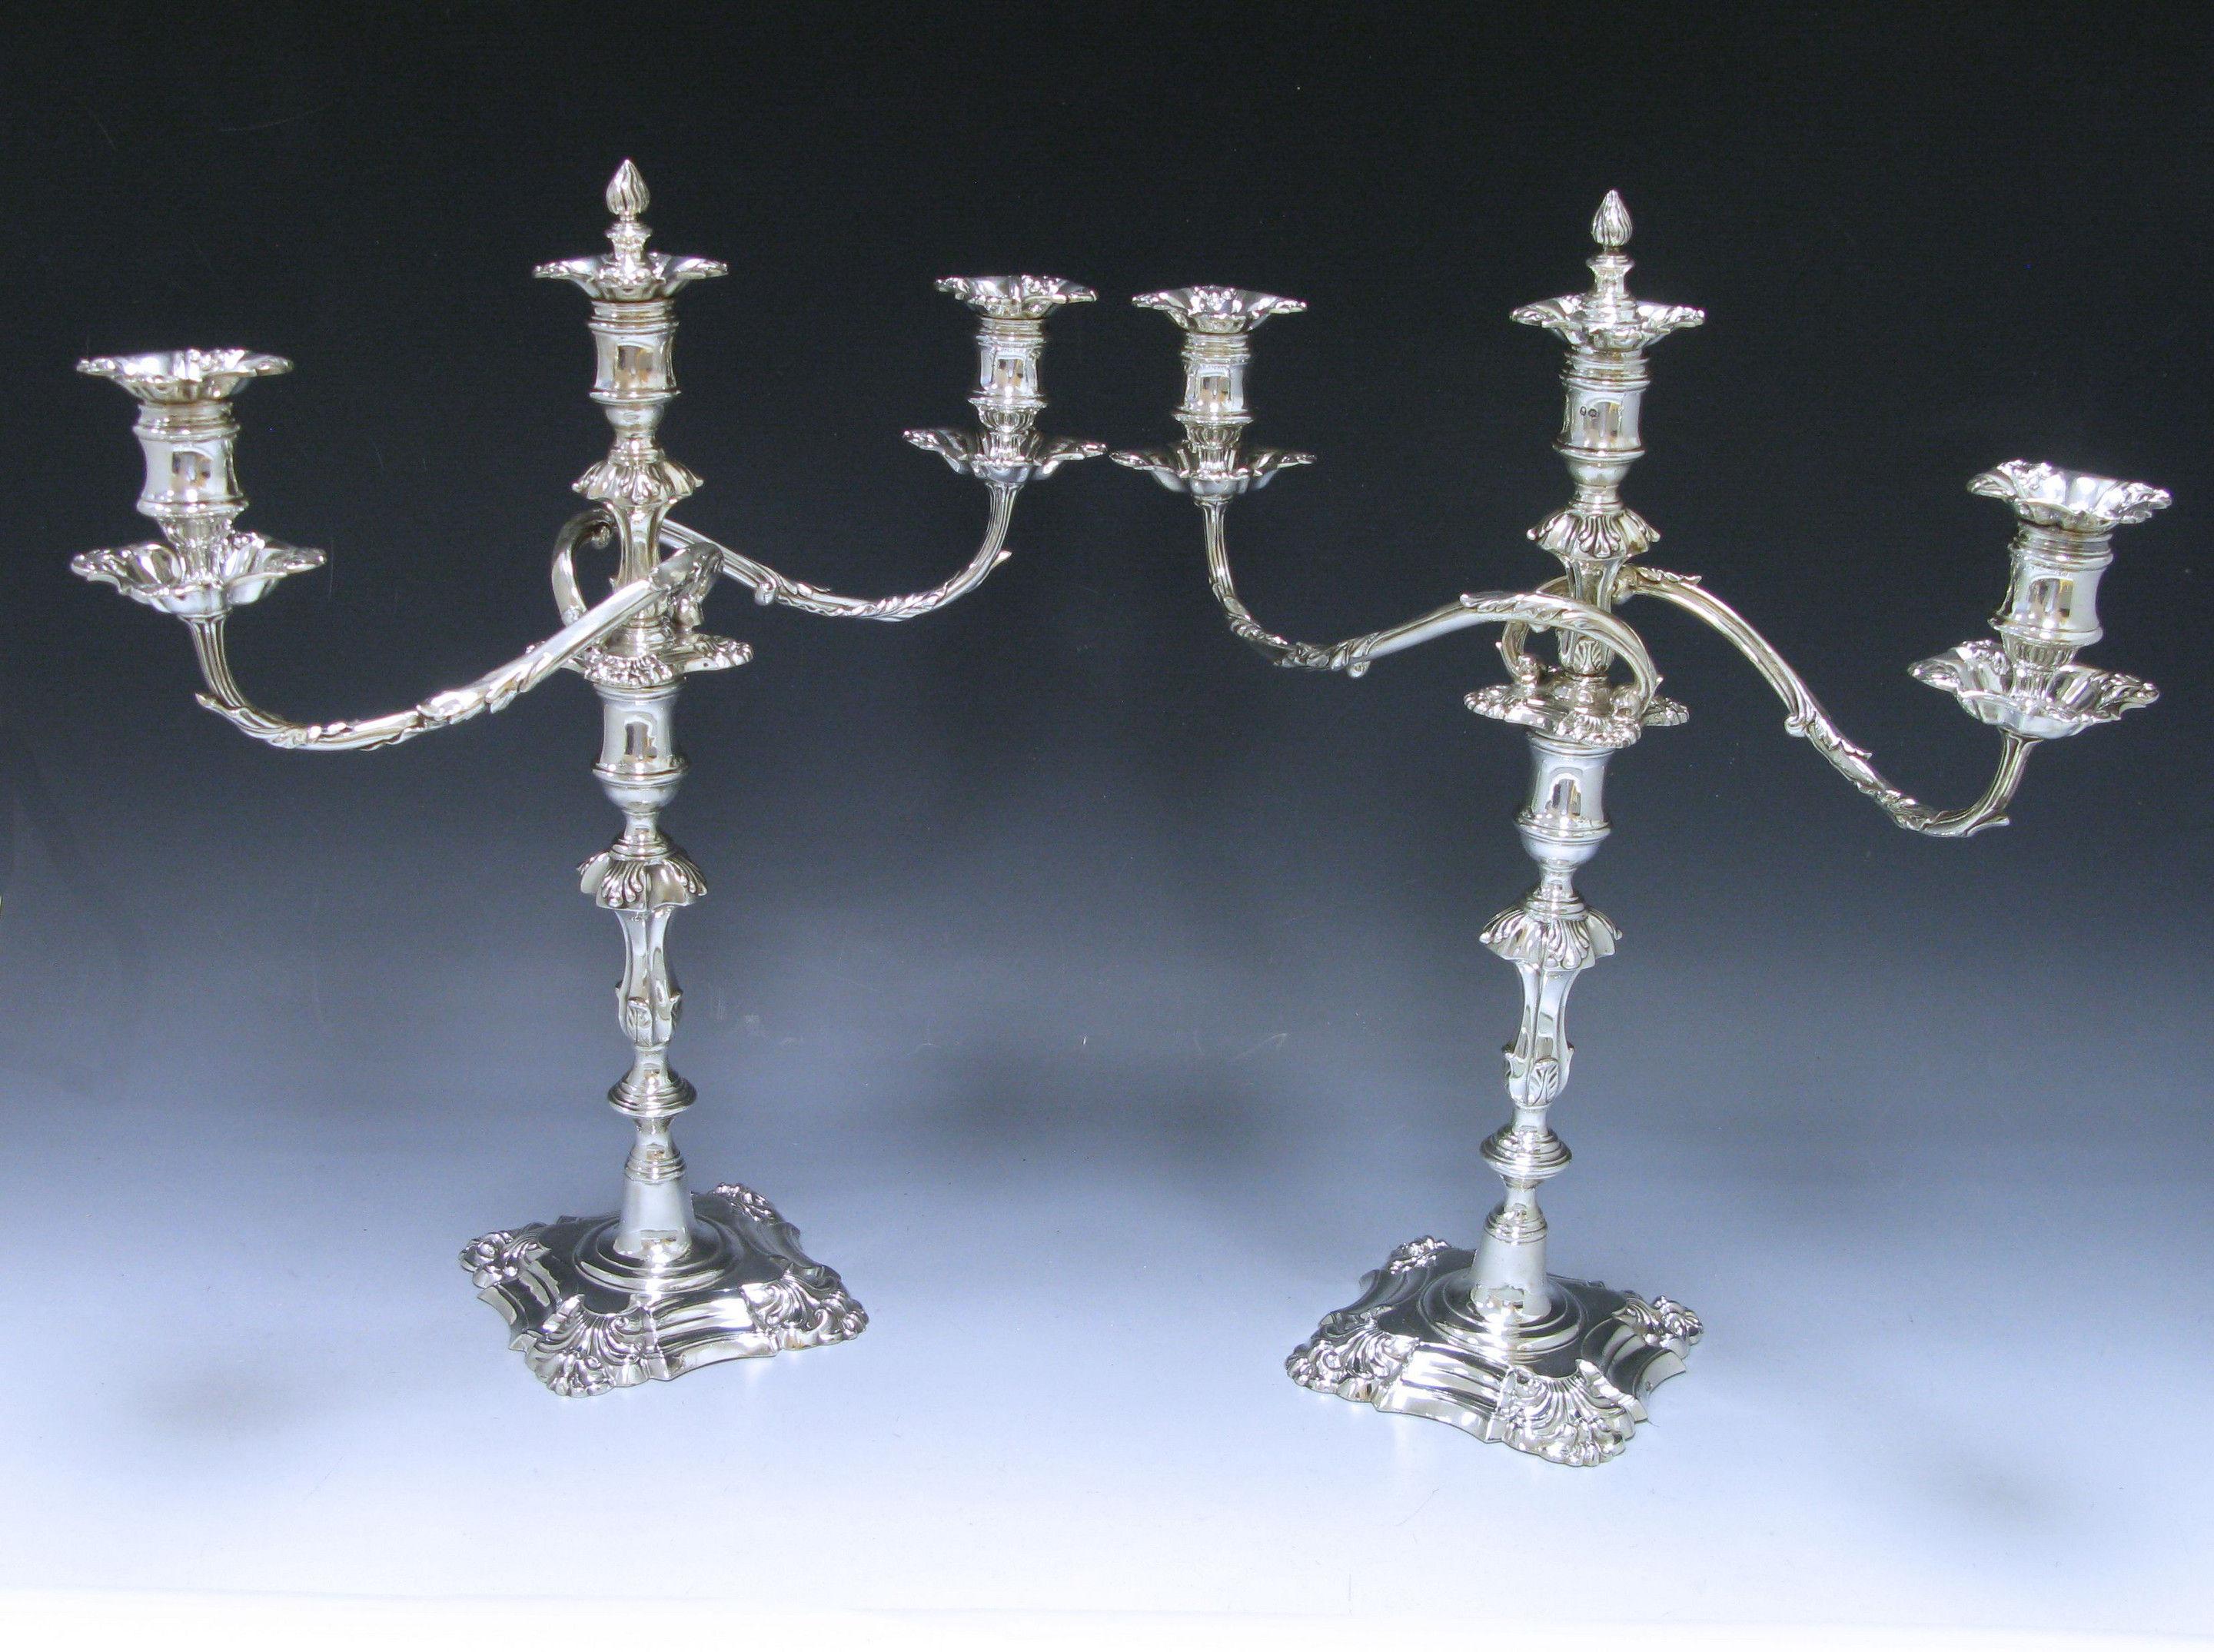 Pair of George iv Antique Silver Three-Light Candelabra For Sale 1